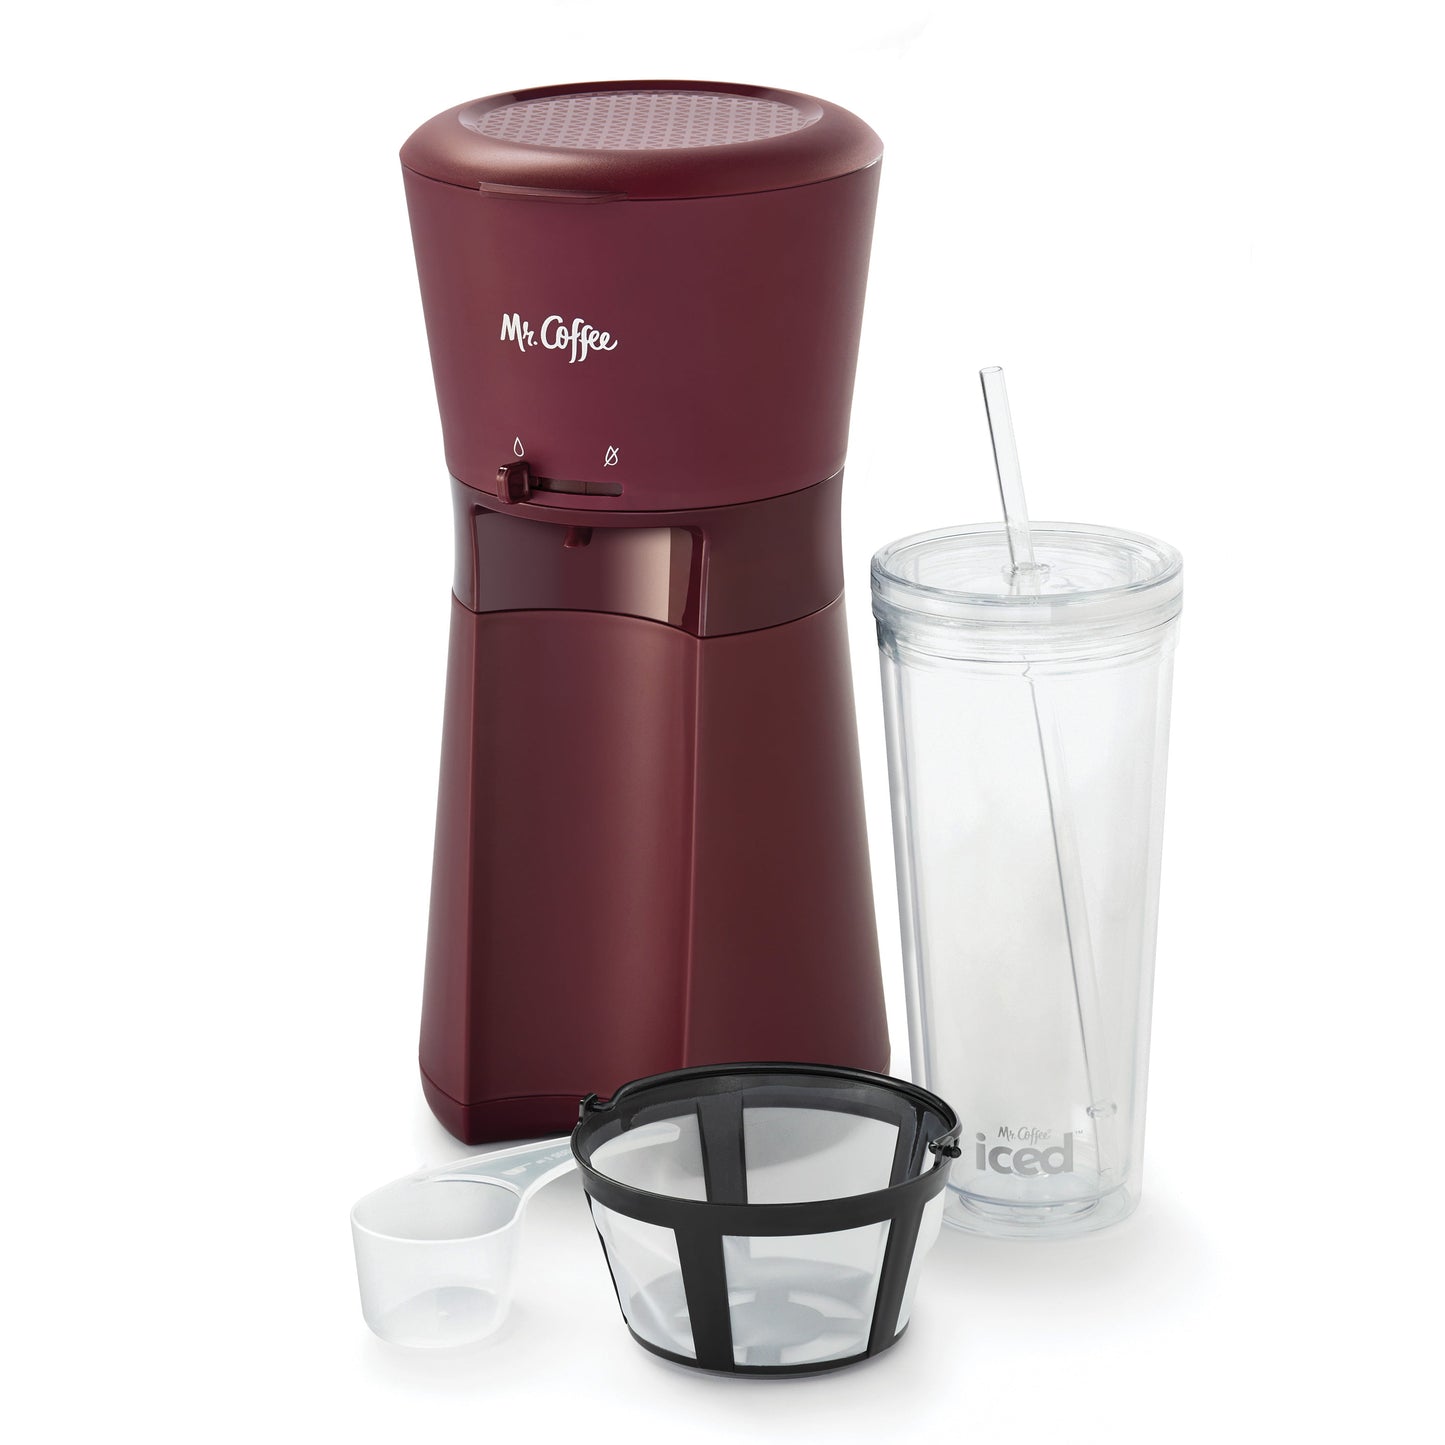 Mr. Coffee® Iced™ Coffee Maker with Reusable Tumbler and Coffee Filter, Burgundy